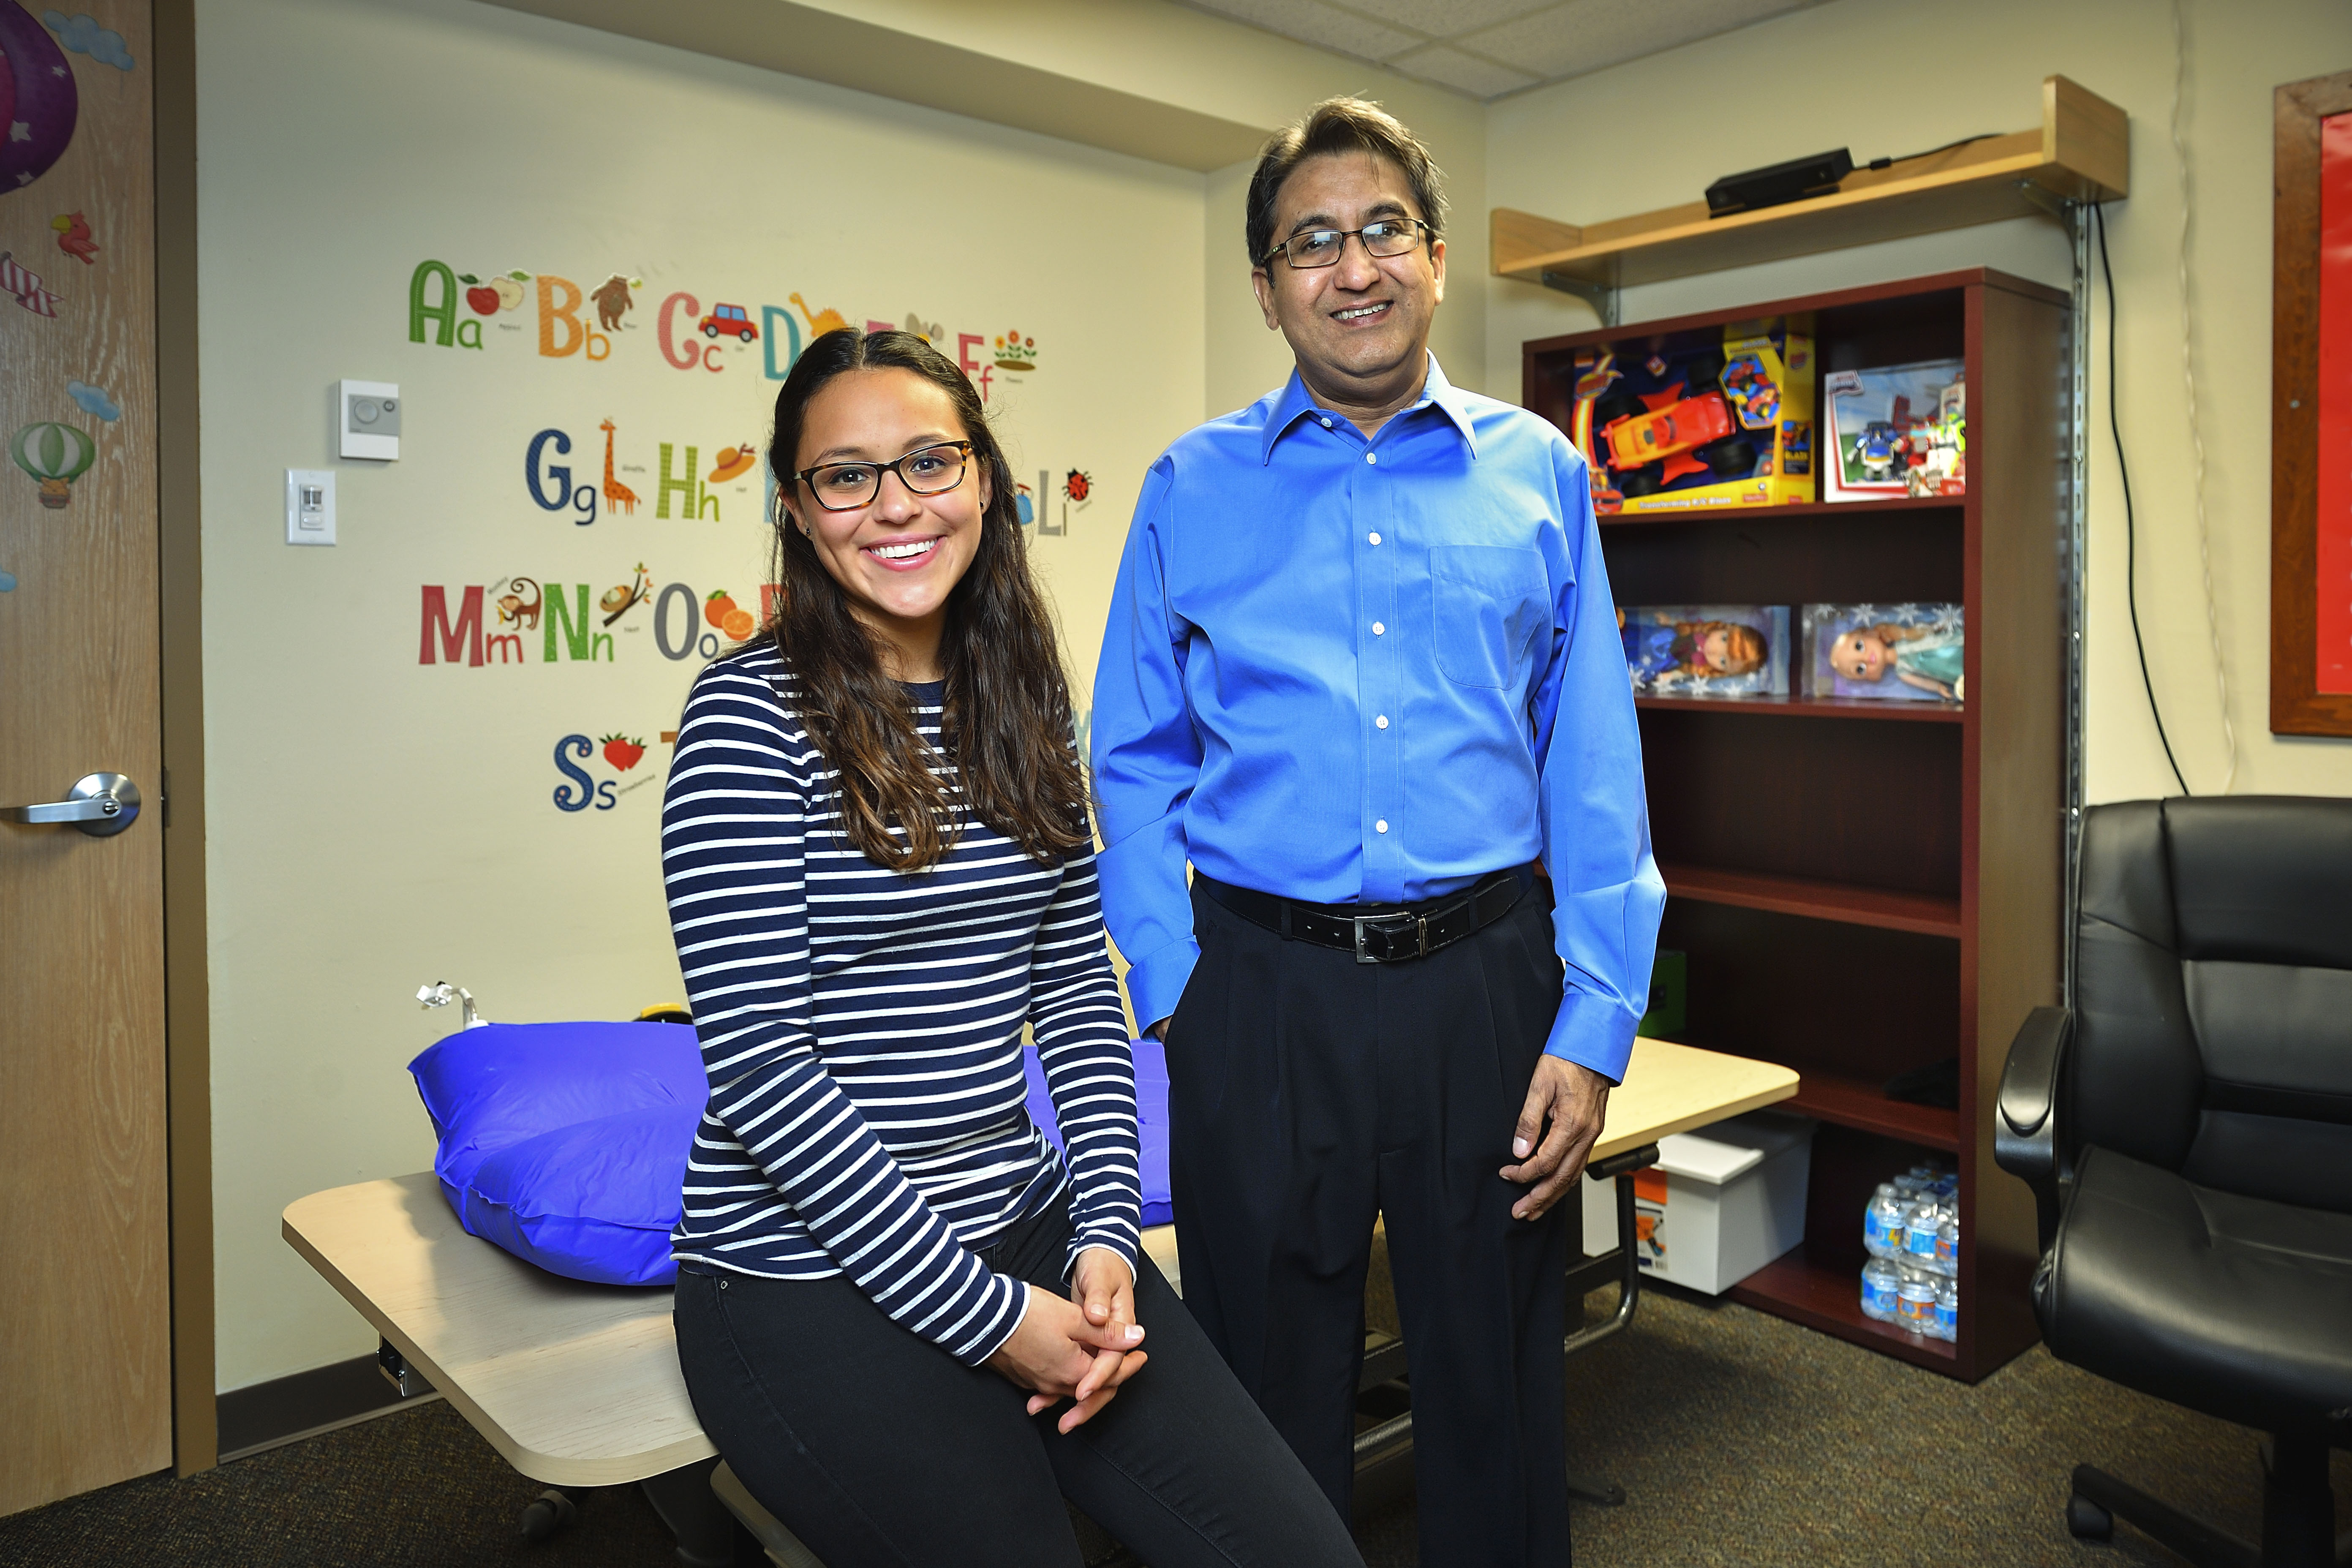 Manish Vaidya, associate professor in the University of North Texas Department of Behavior Analysis, and graduate student Maria Otero are using a motion monitoring computer program to teach young children to stay mostly motionless during radiation treatments for cancer. They are currently testing the technology on healthy children.

